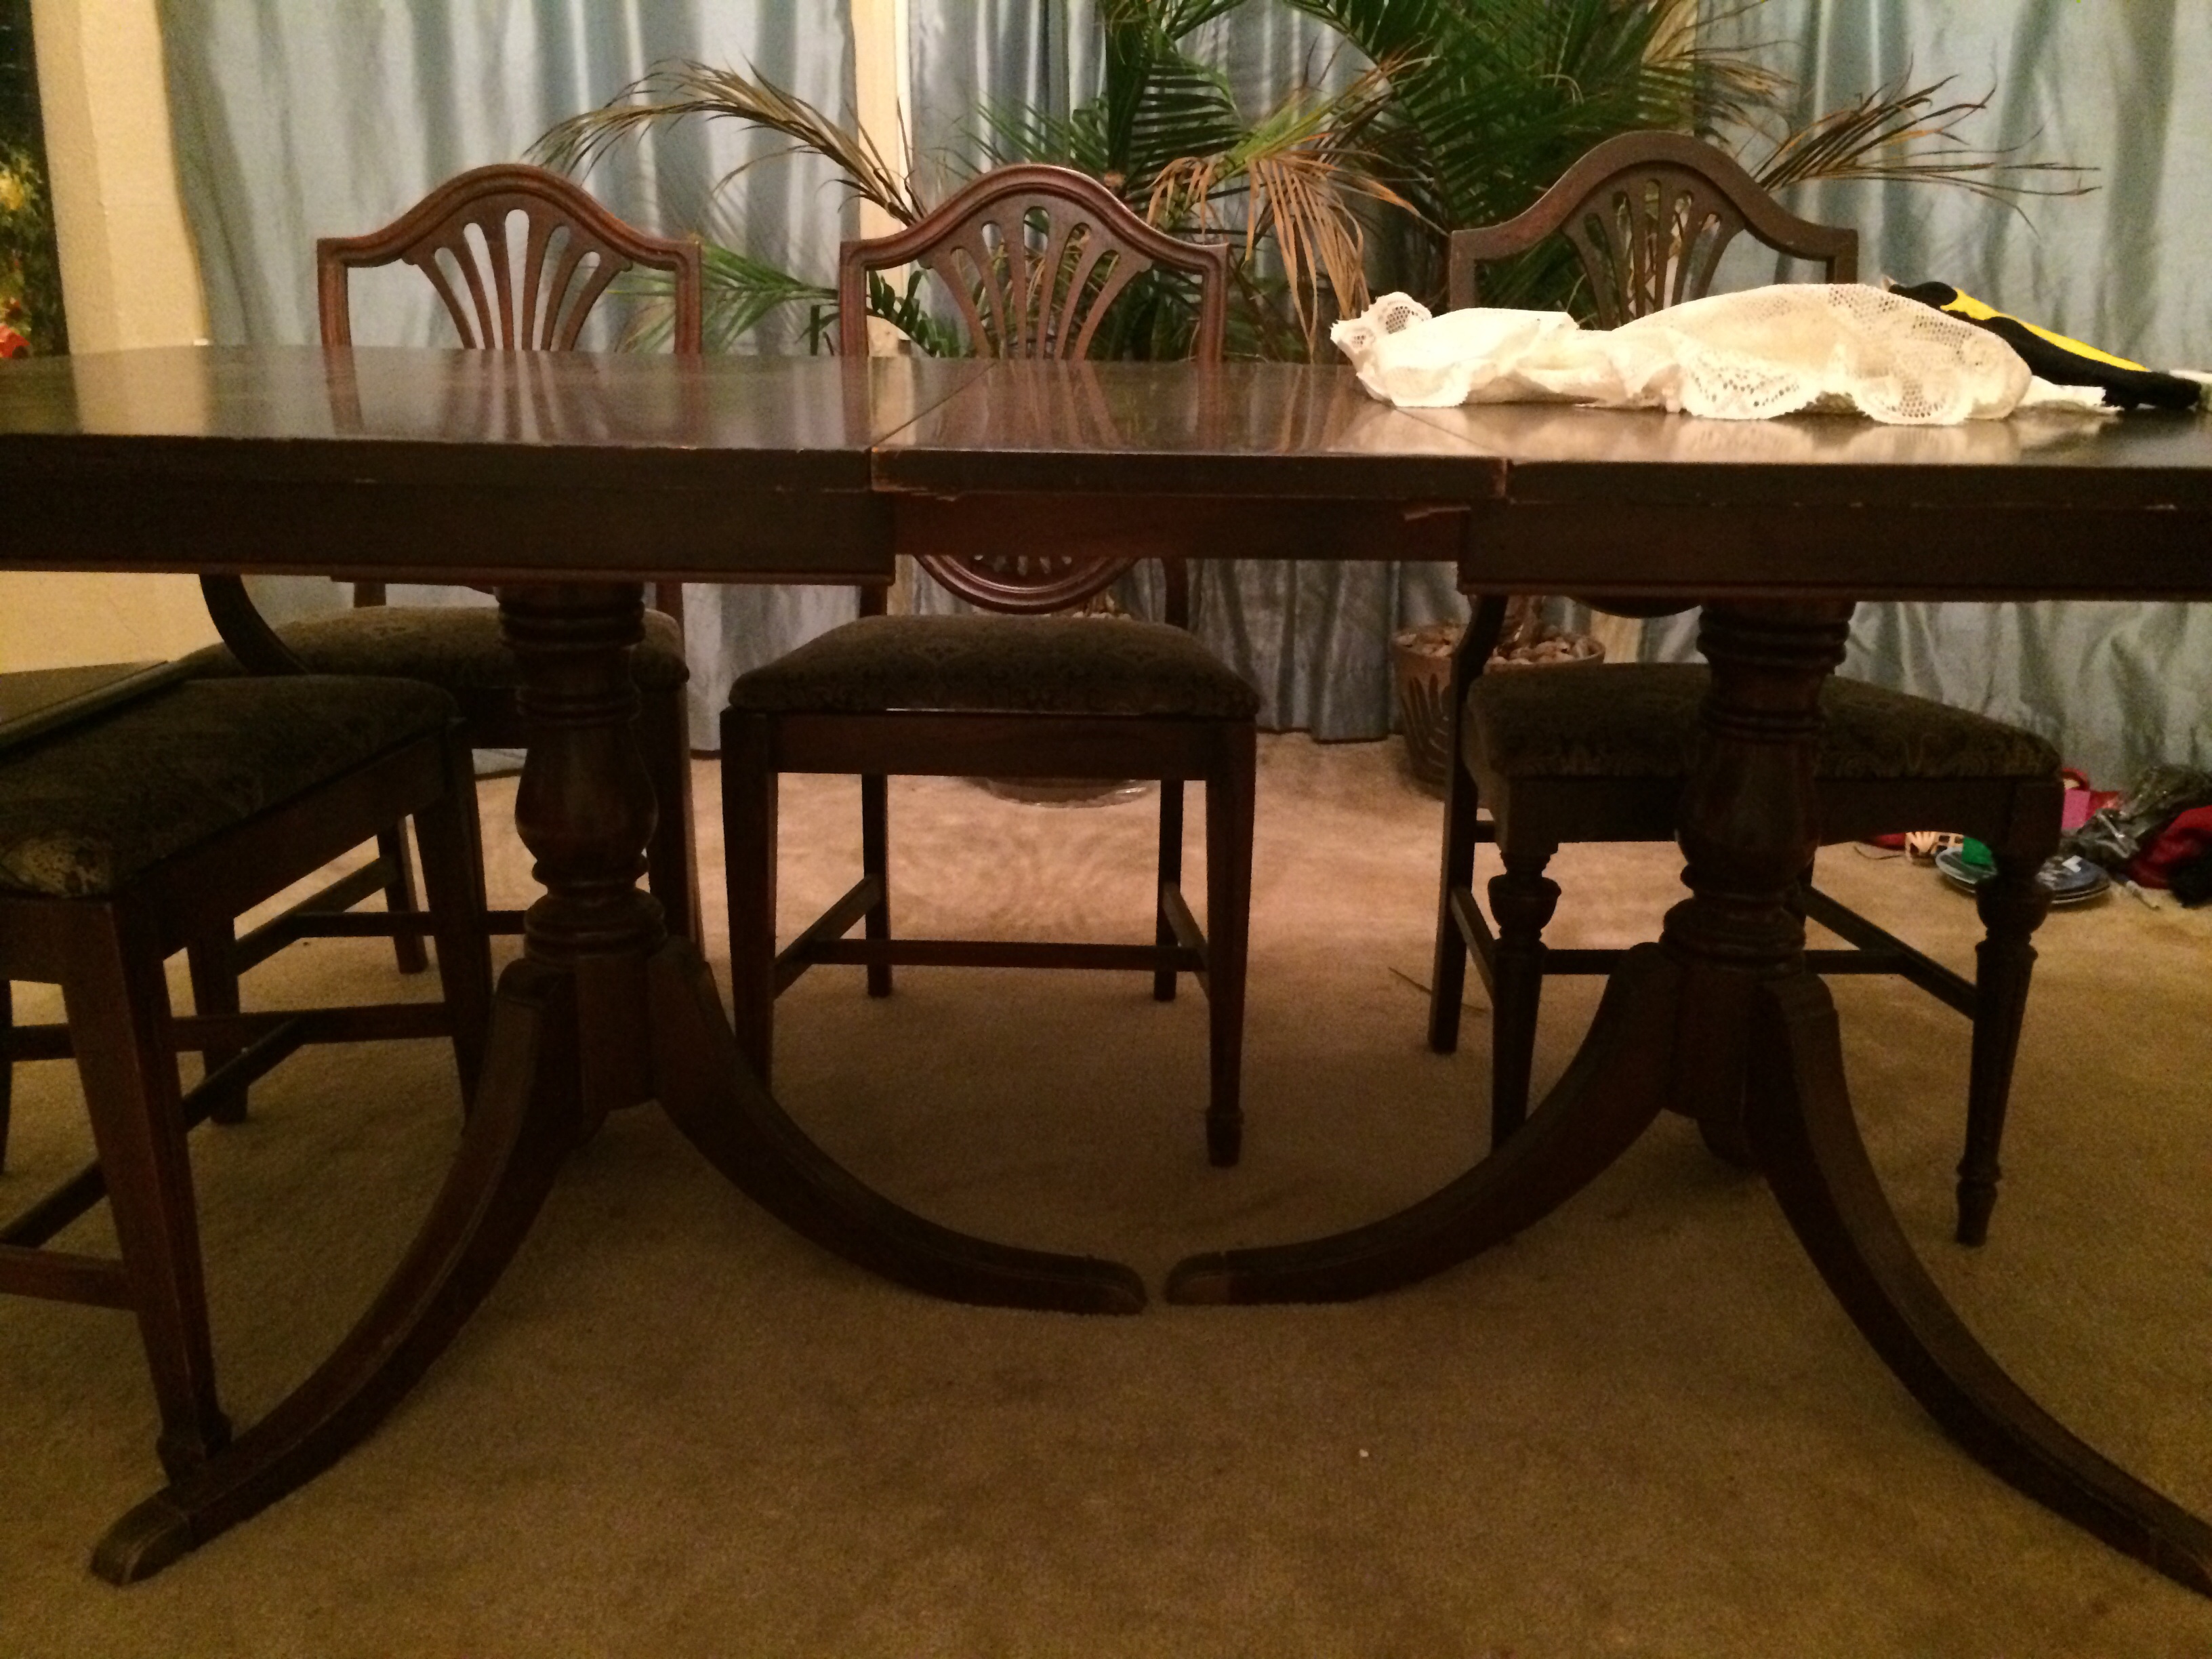 Duncan Phyphe Table and chairs